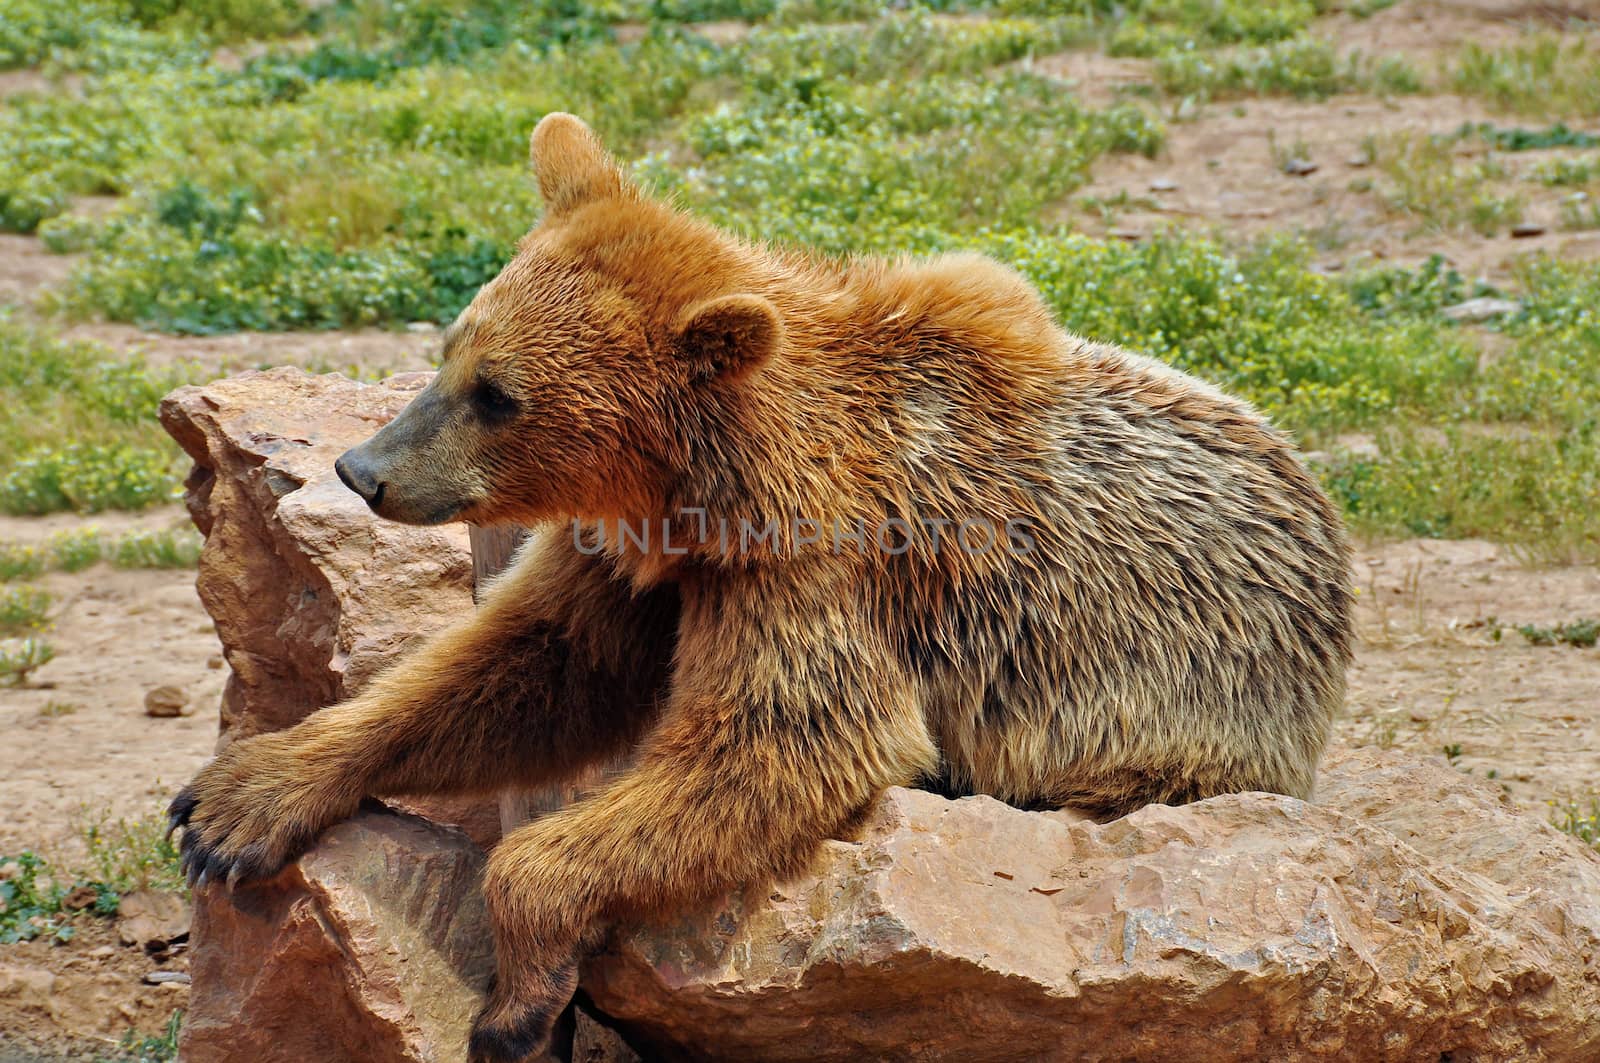 Brown bear resting on rocks. Wild animal in natural environment.